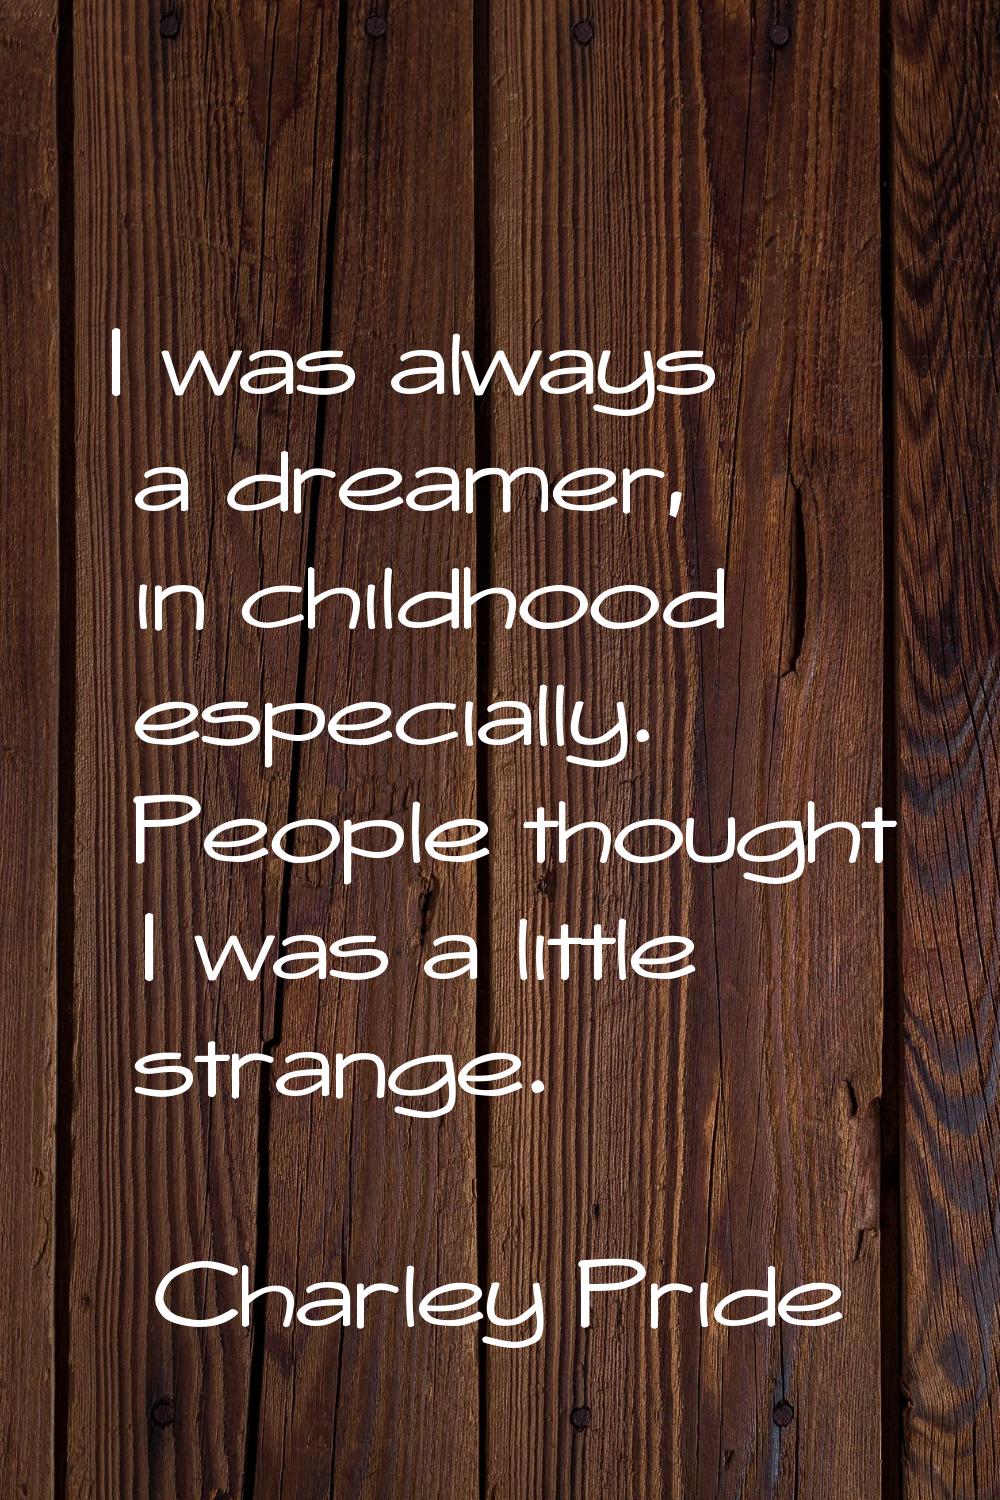 I was always a dreamer, in childhood especially. People thought I was a little strange.